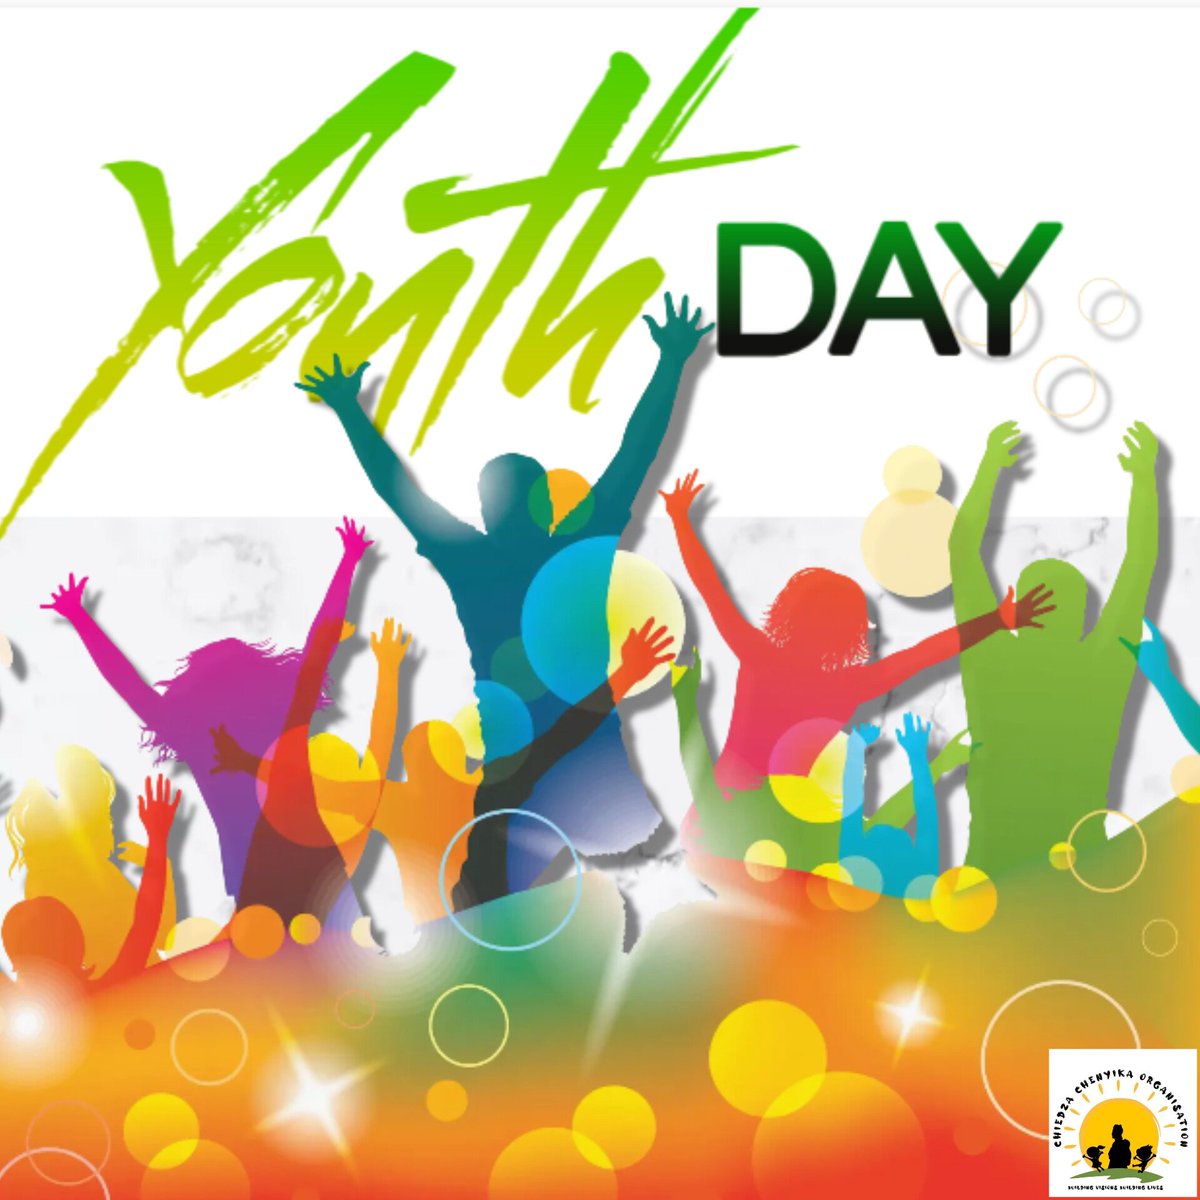 National Youth Day is a reminder of the energy, creativity and vision of our young people. Youth are the future of our nation. Celebrate National Youth Day

#NationalYouthDay
#GenerationChange
#YouthEmpowerment
#YouthLeadership
#YouthIsTheFuture
#YouthForChange